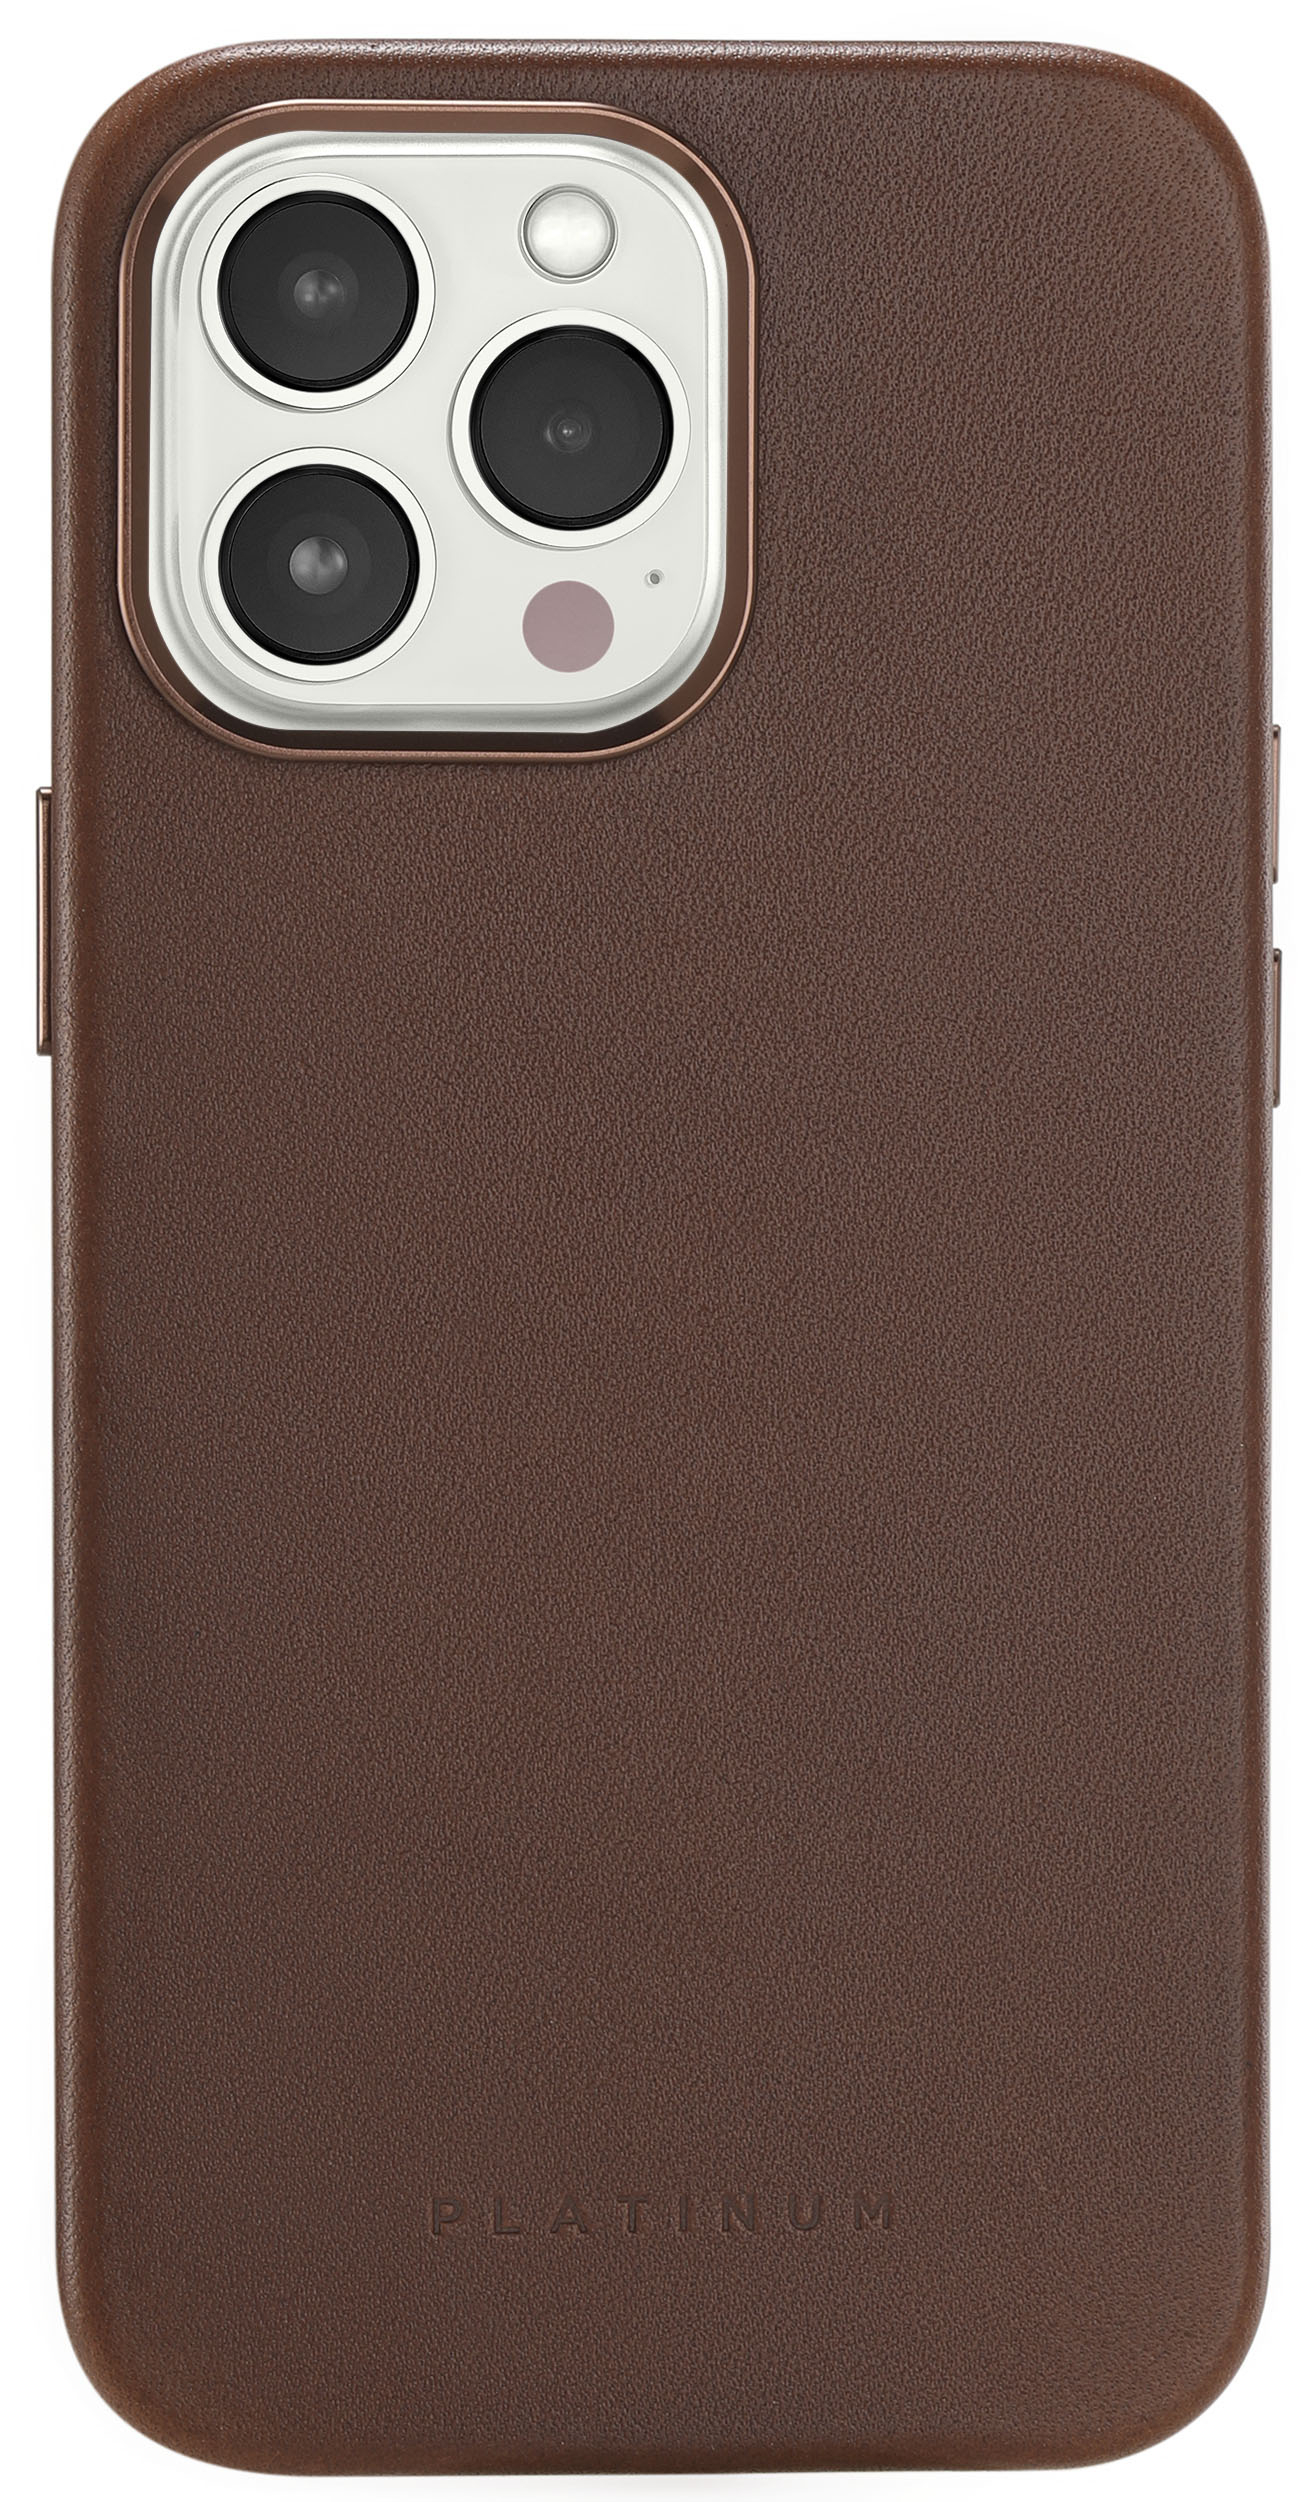 Platinum - Horween Leather Case for iPhone 13 Pro - Bourbon